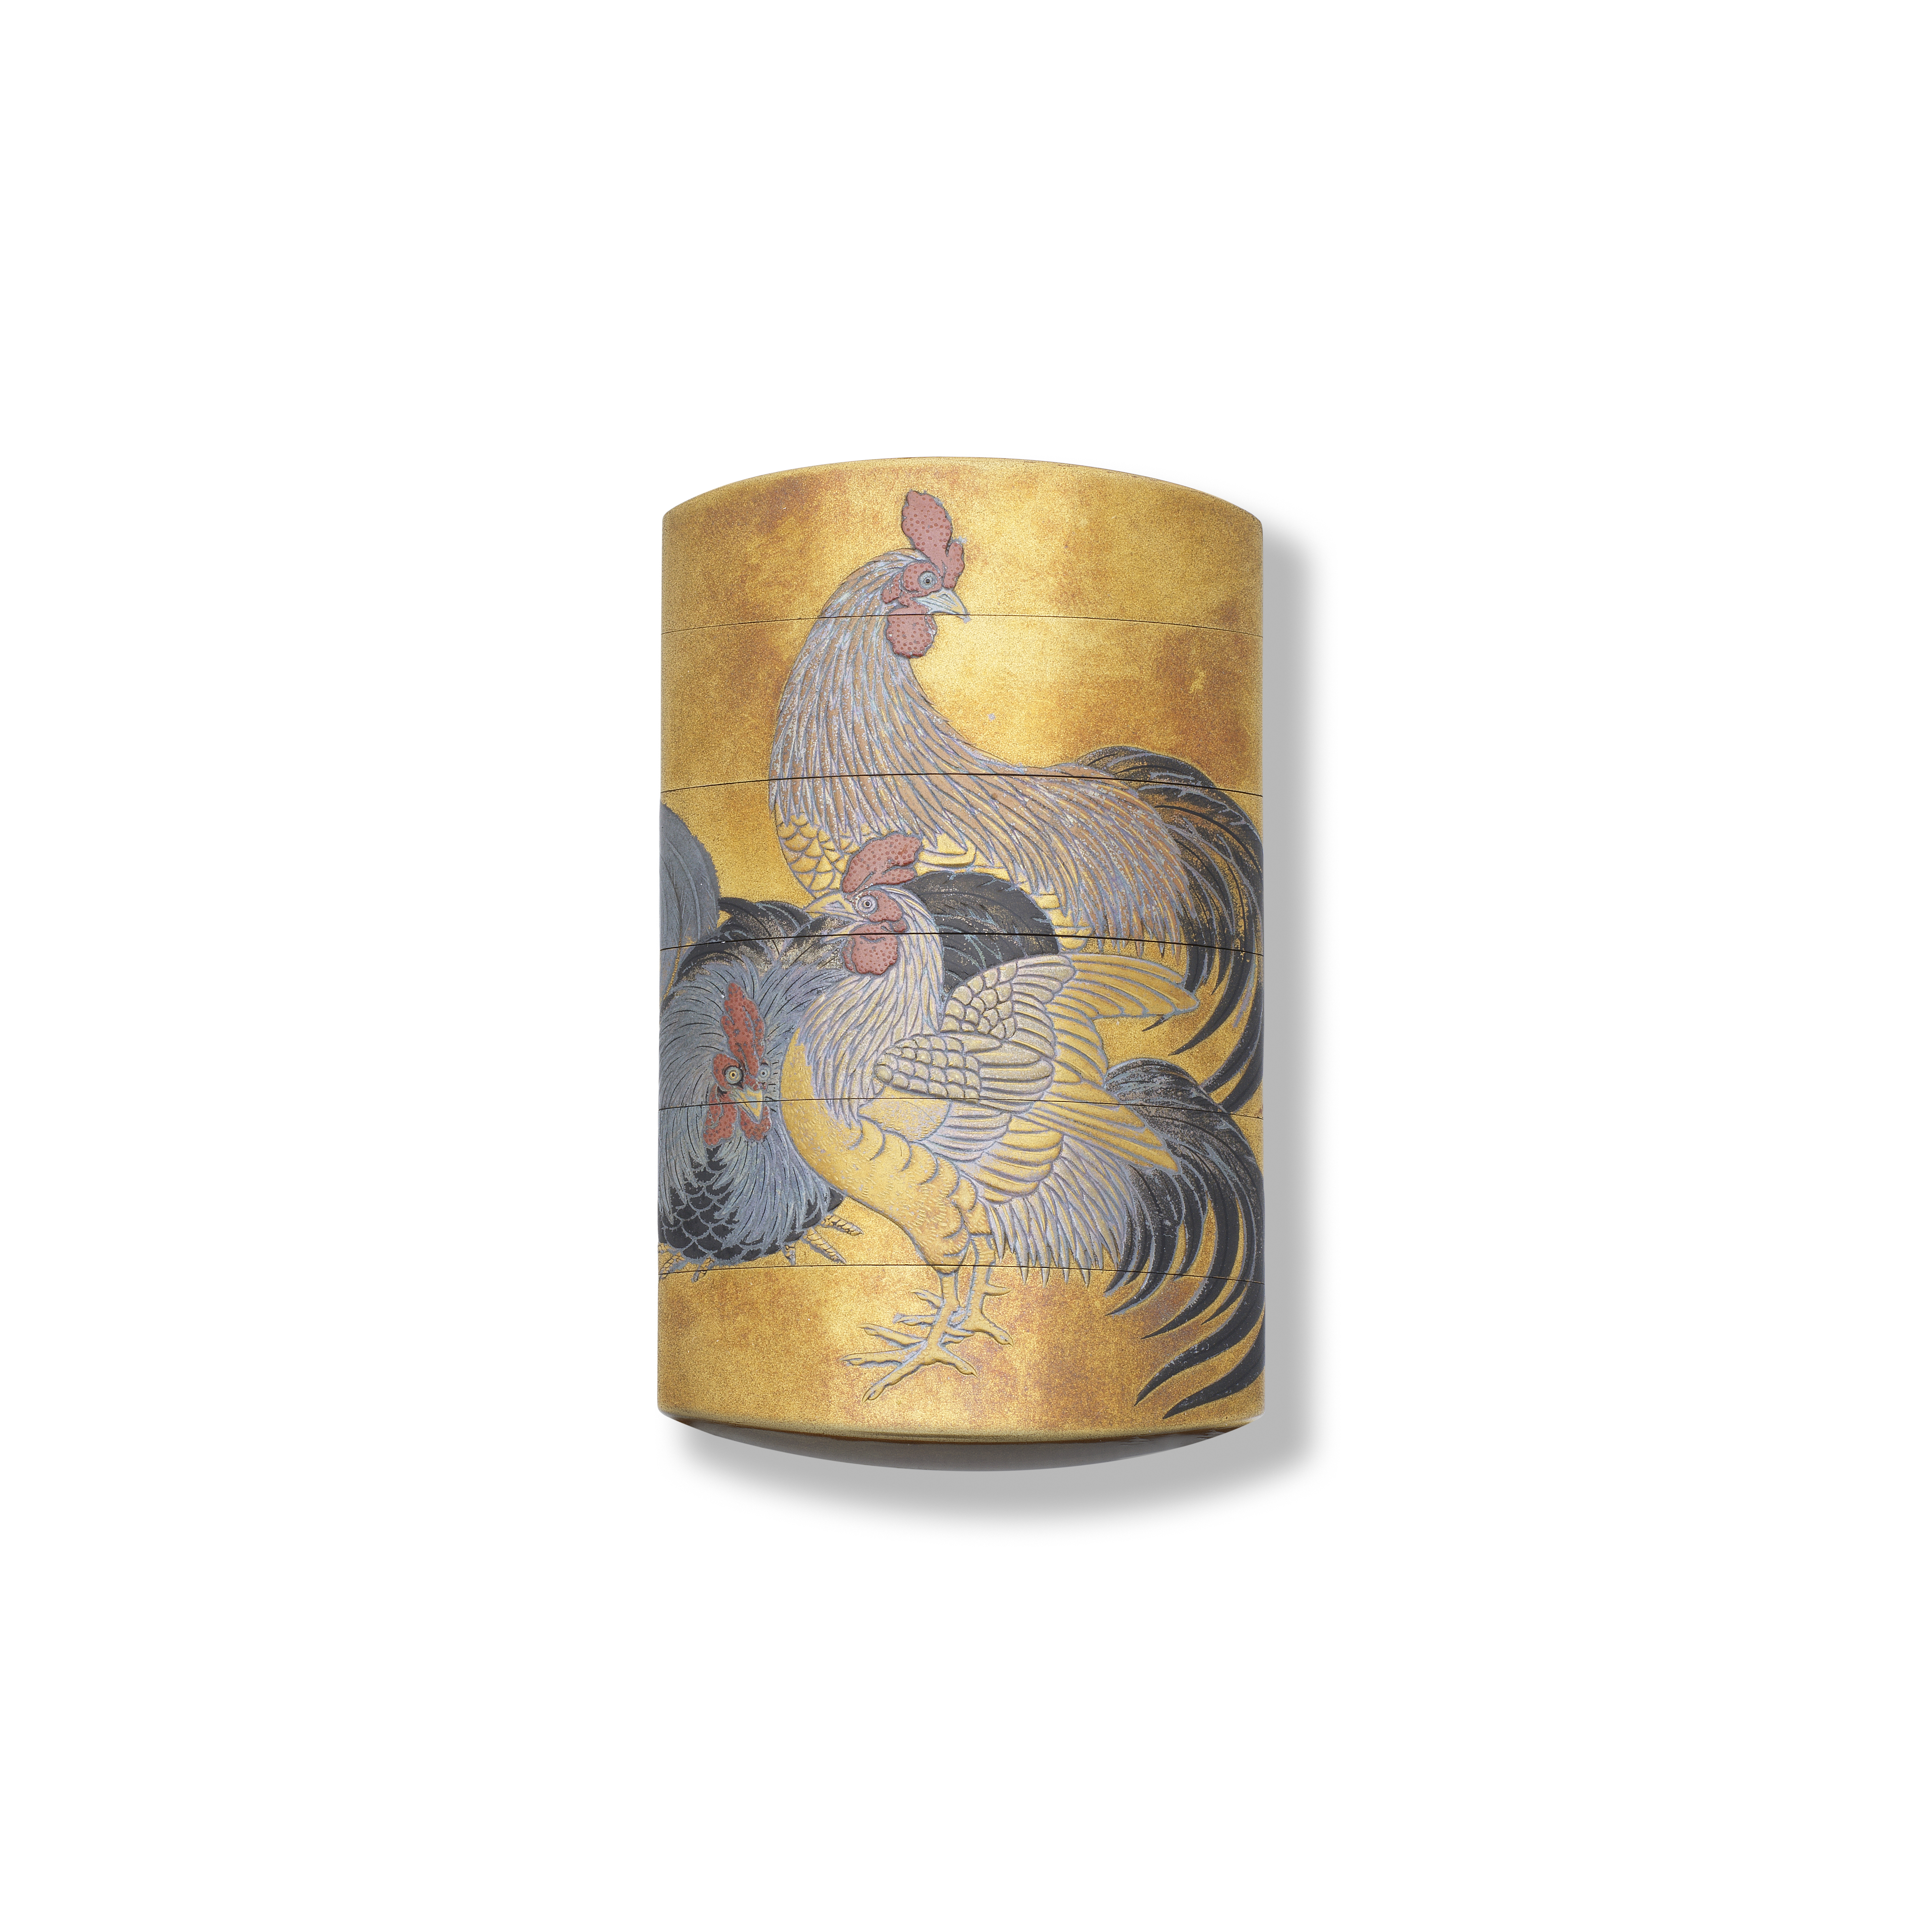 A GOLD-LACQUER FIVE-CASE INRO Meiji era (1868-1912), late 19th/early 20th century